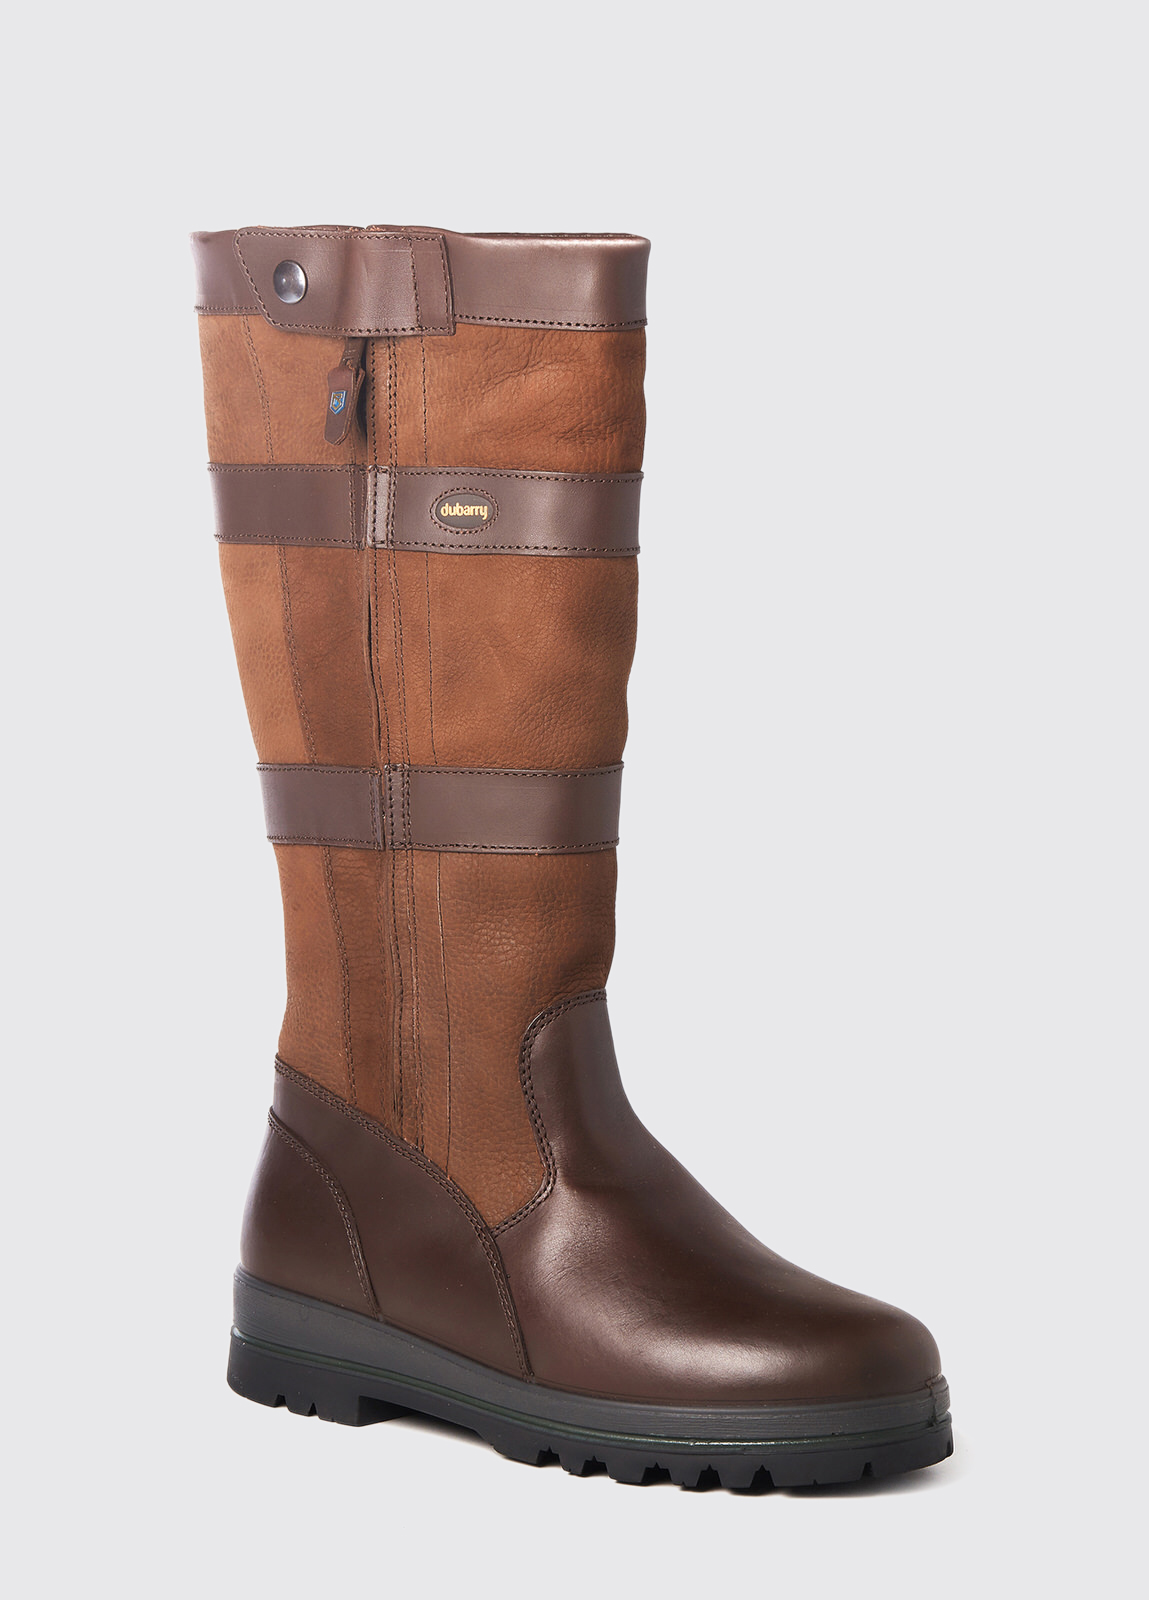 Wexford Walnut Country Boots | Dubarry of Ireland